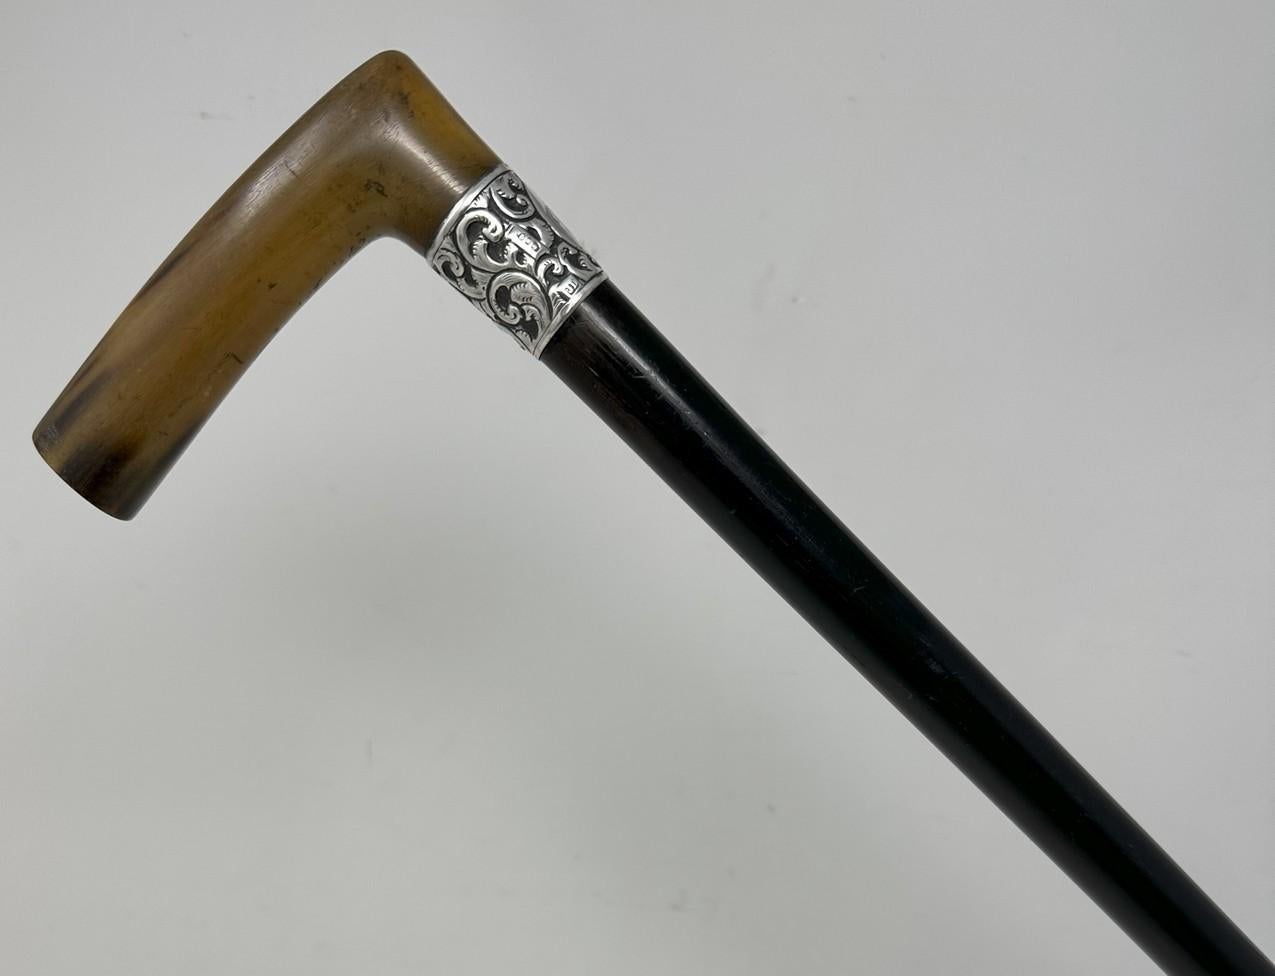 Very Stylish Fine Quality Polished Ebony Wooden Lady’s or Gentleman’s Walking Cane of substantial quality and good weight very suitable to use as an everyday stick, with an elegant decoratively carved classical Cow Horn L Shaped handle above a